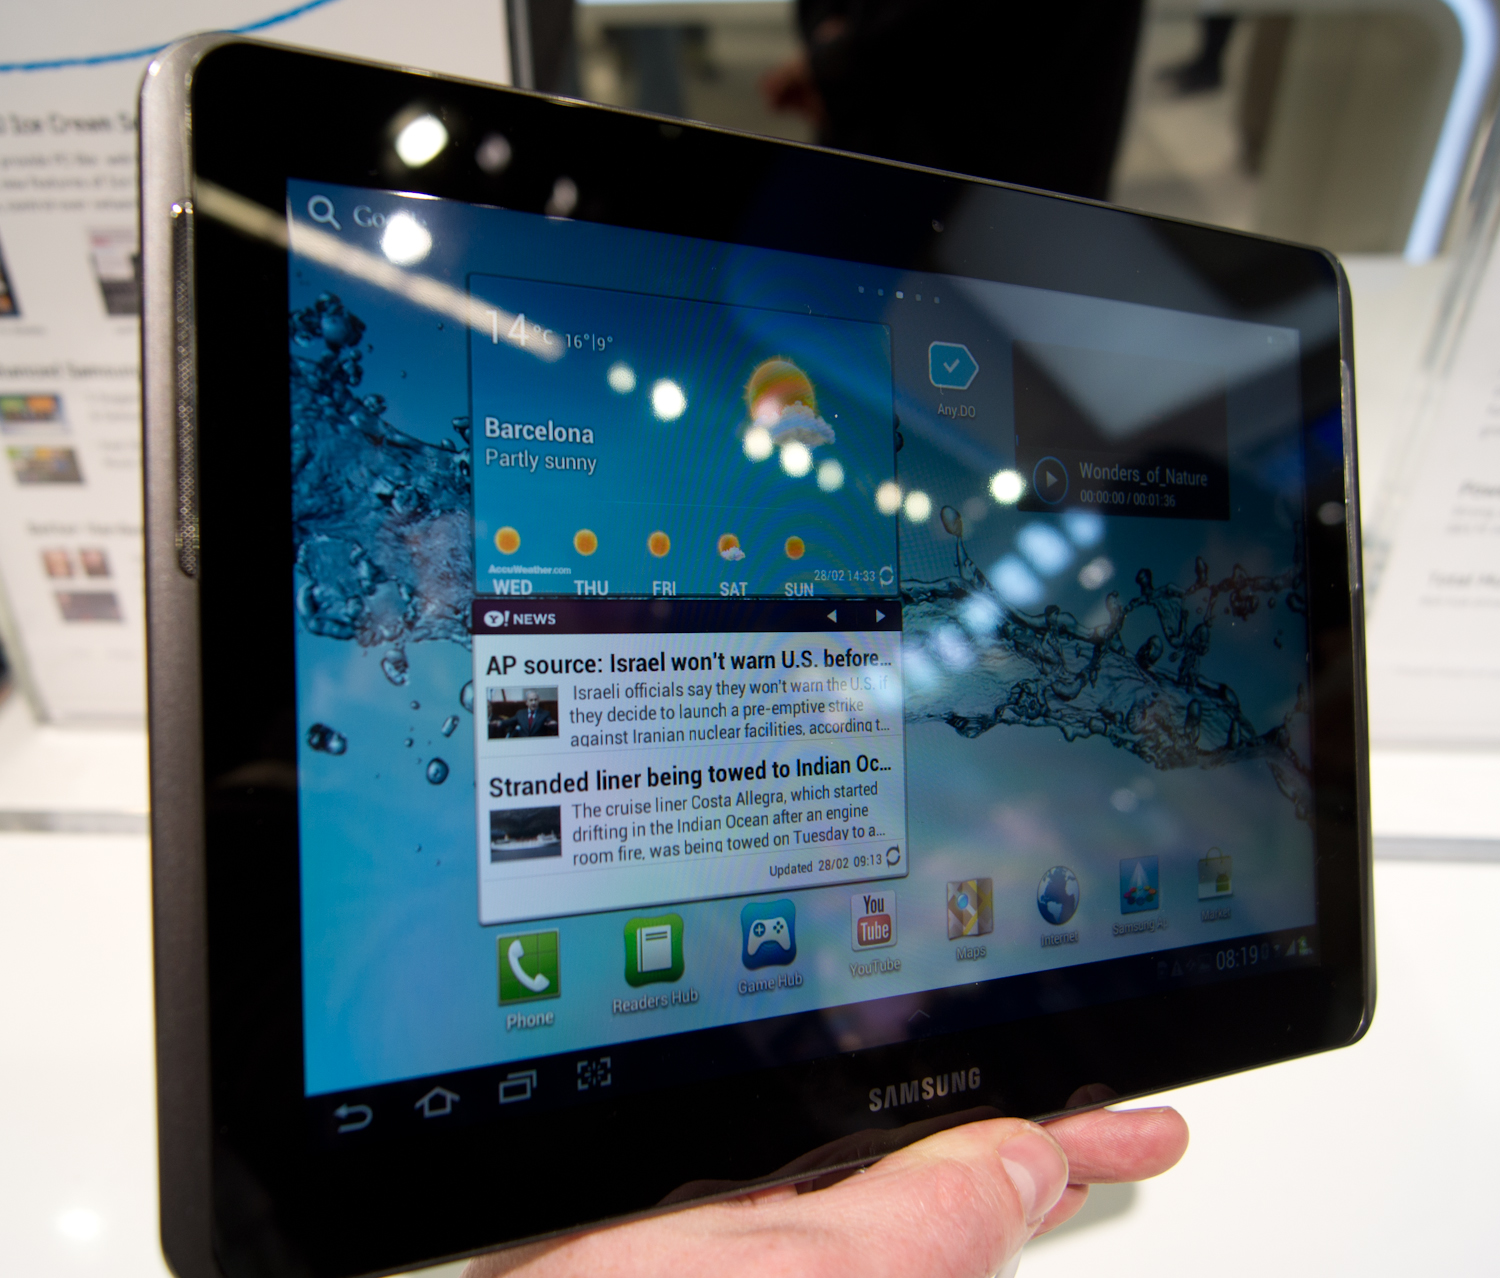 Samsung Galaxy Tab 2 review: first look